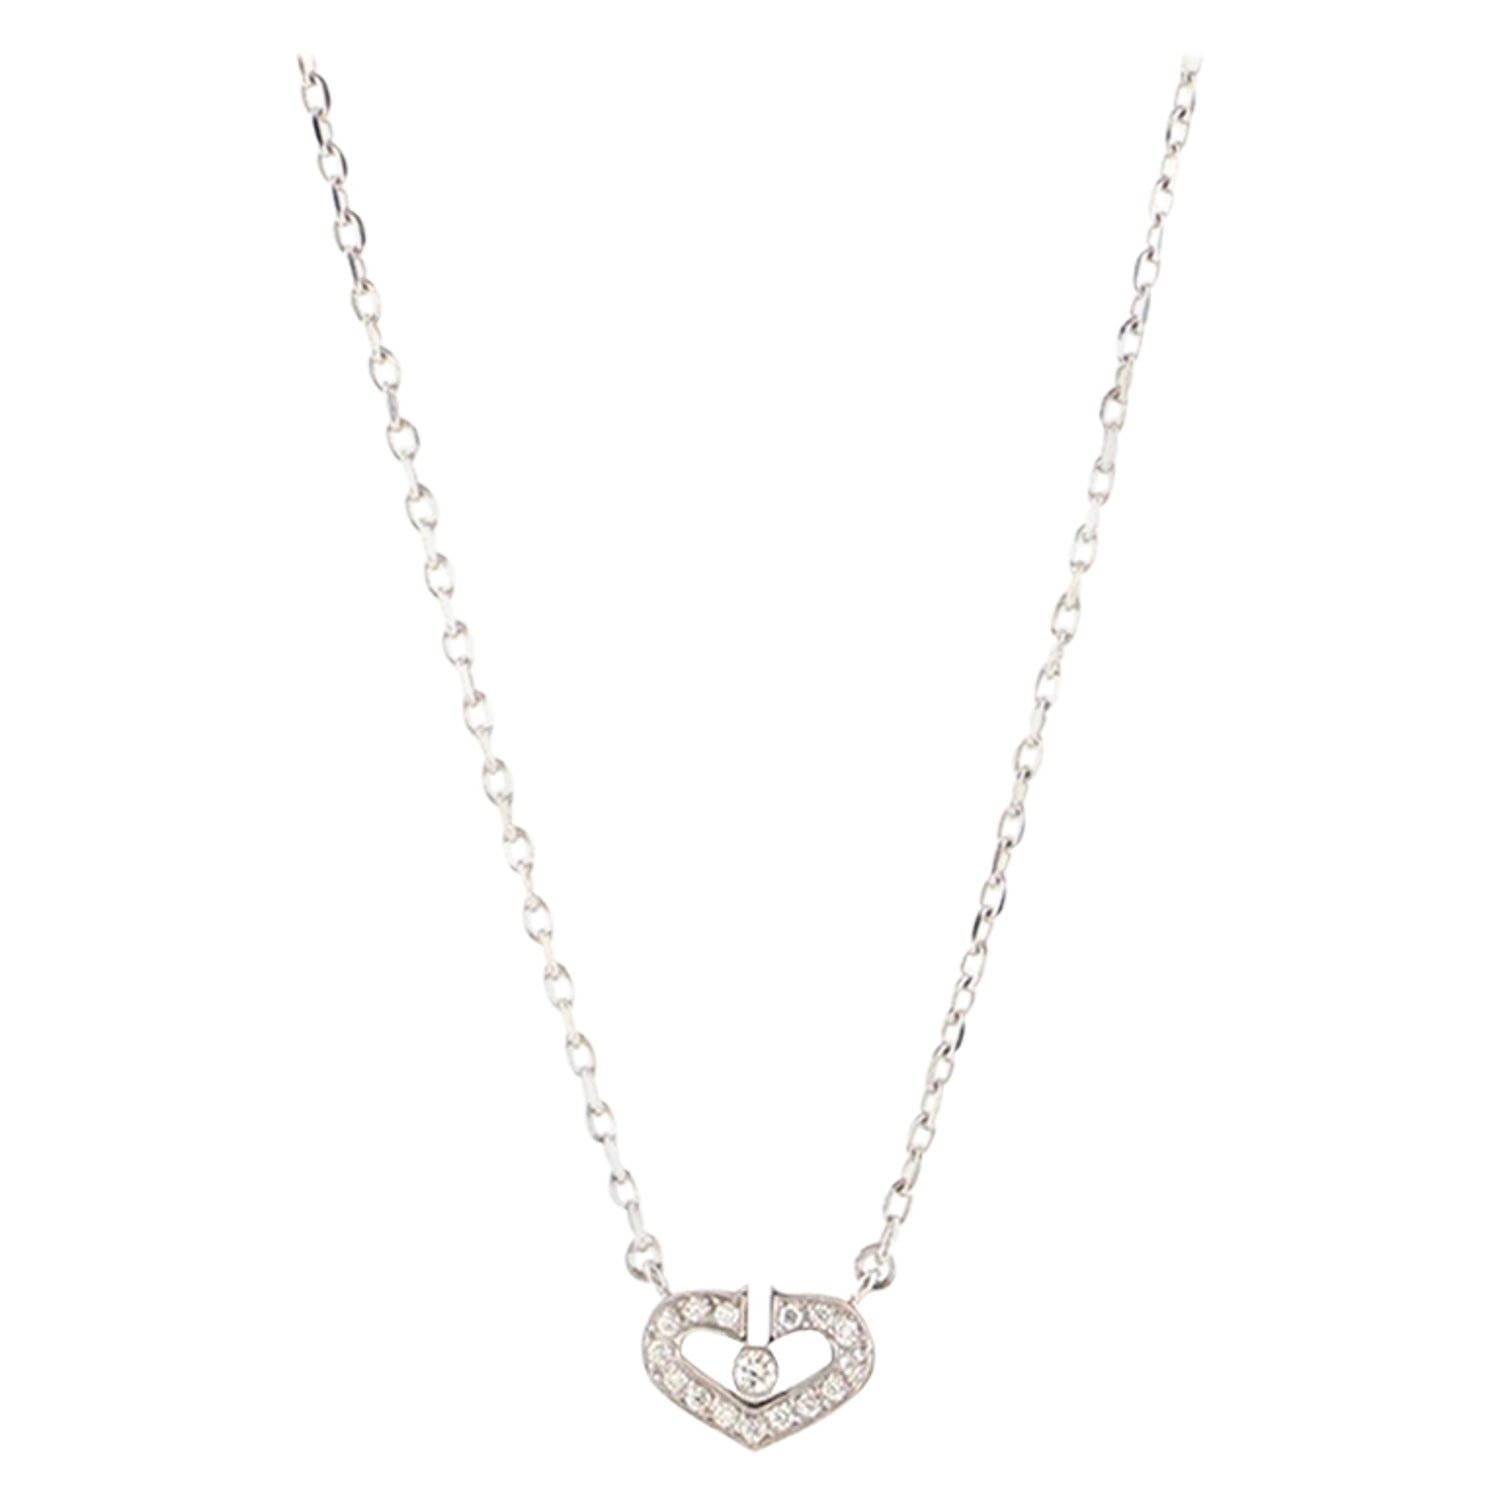 Louis Vuitton® B Blossom Necklace, Pink Gold, White Gold, Pink